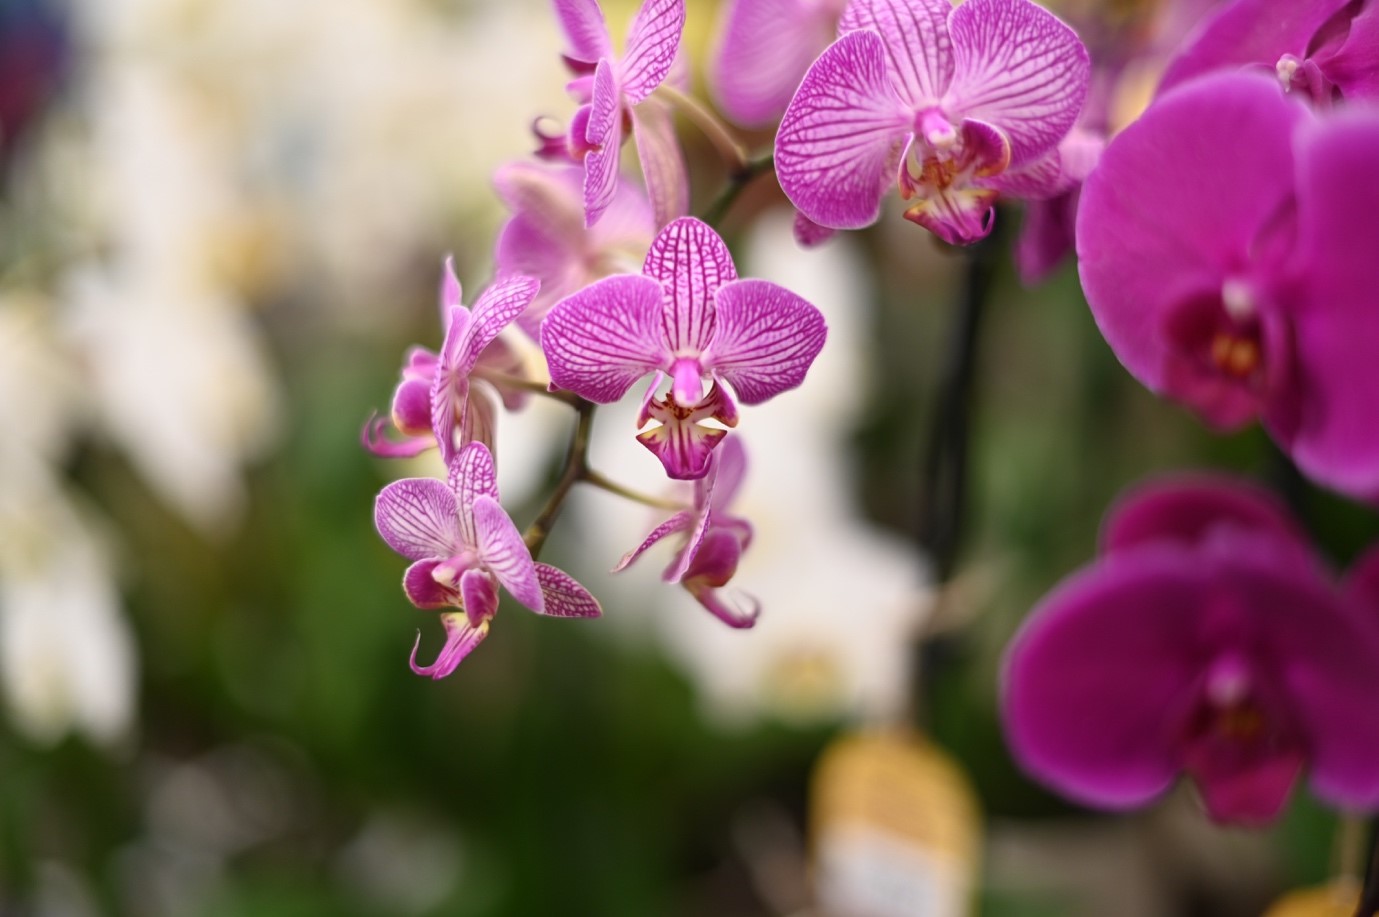 Where the World of Orchids and New York City Collide